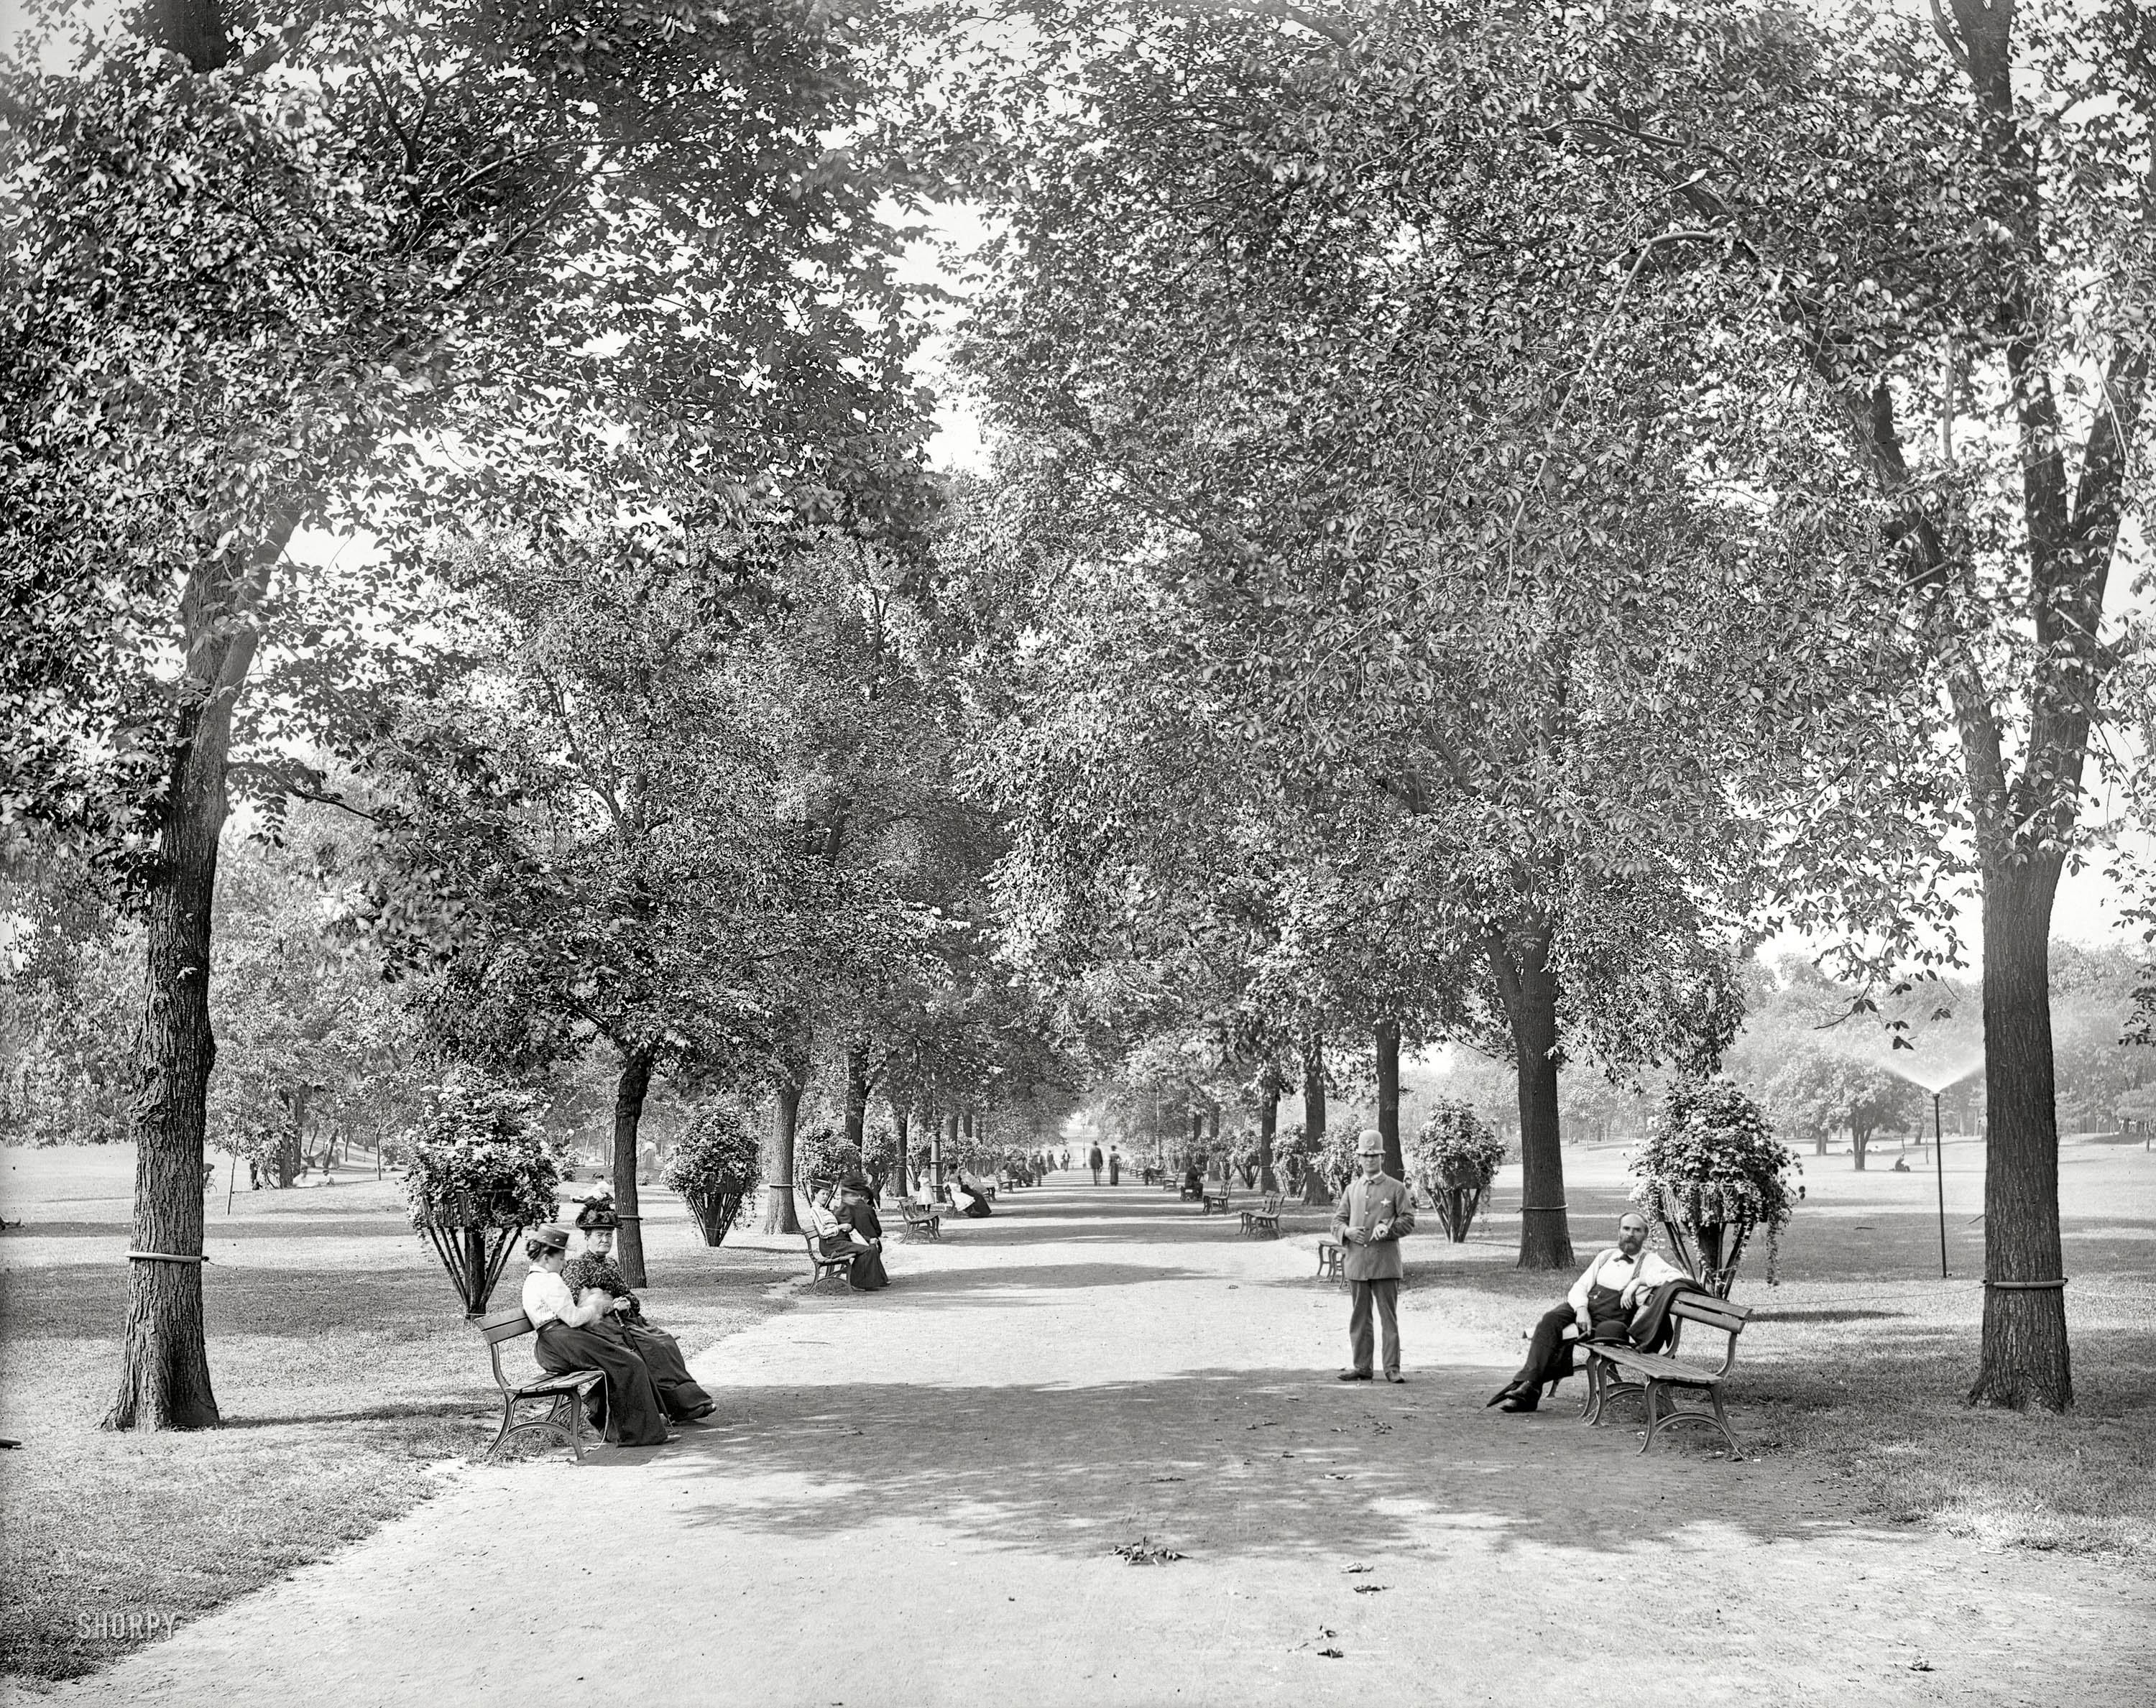 Chicago circa 1900. "A walk in Lincoln Park." We spy a hazard for any tots inclined to run behind park benches. 8x10 glass negative. View full size.